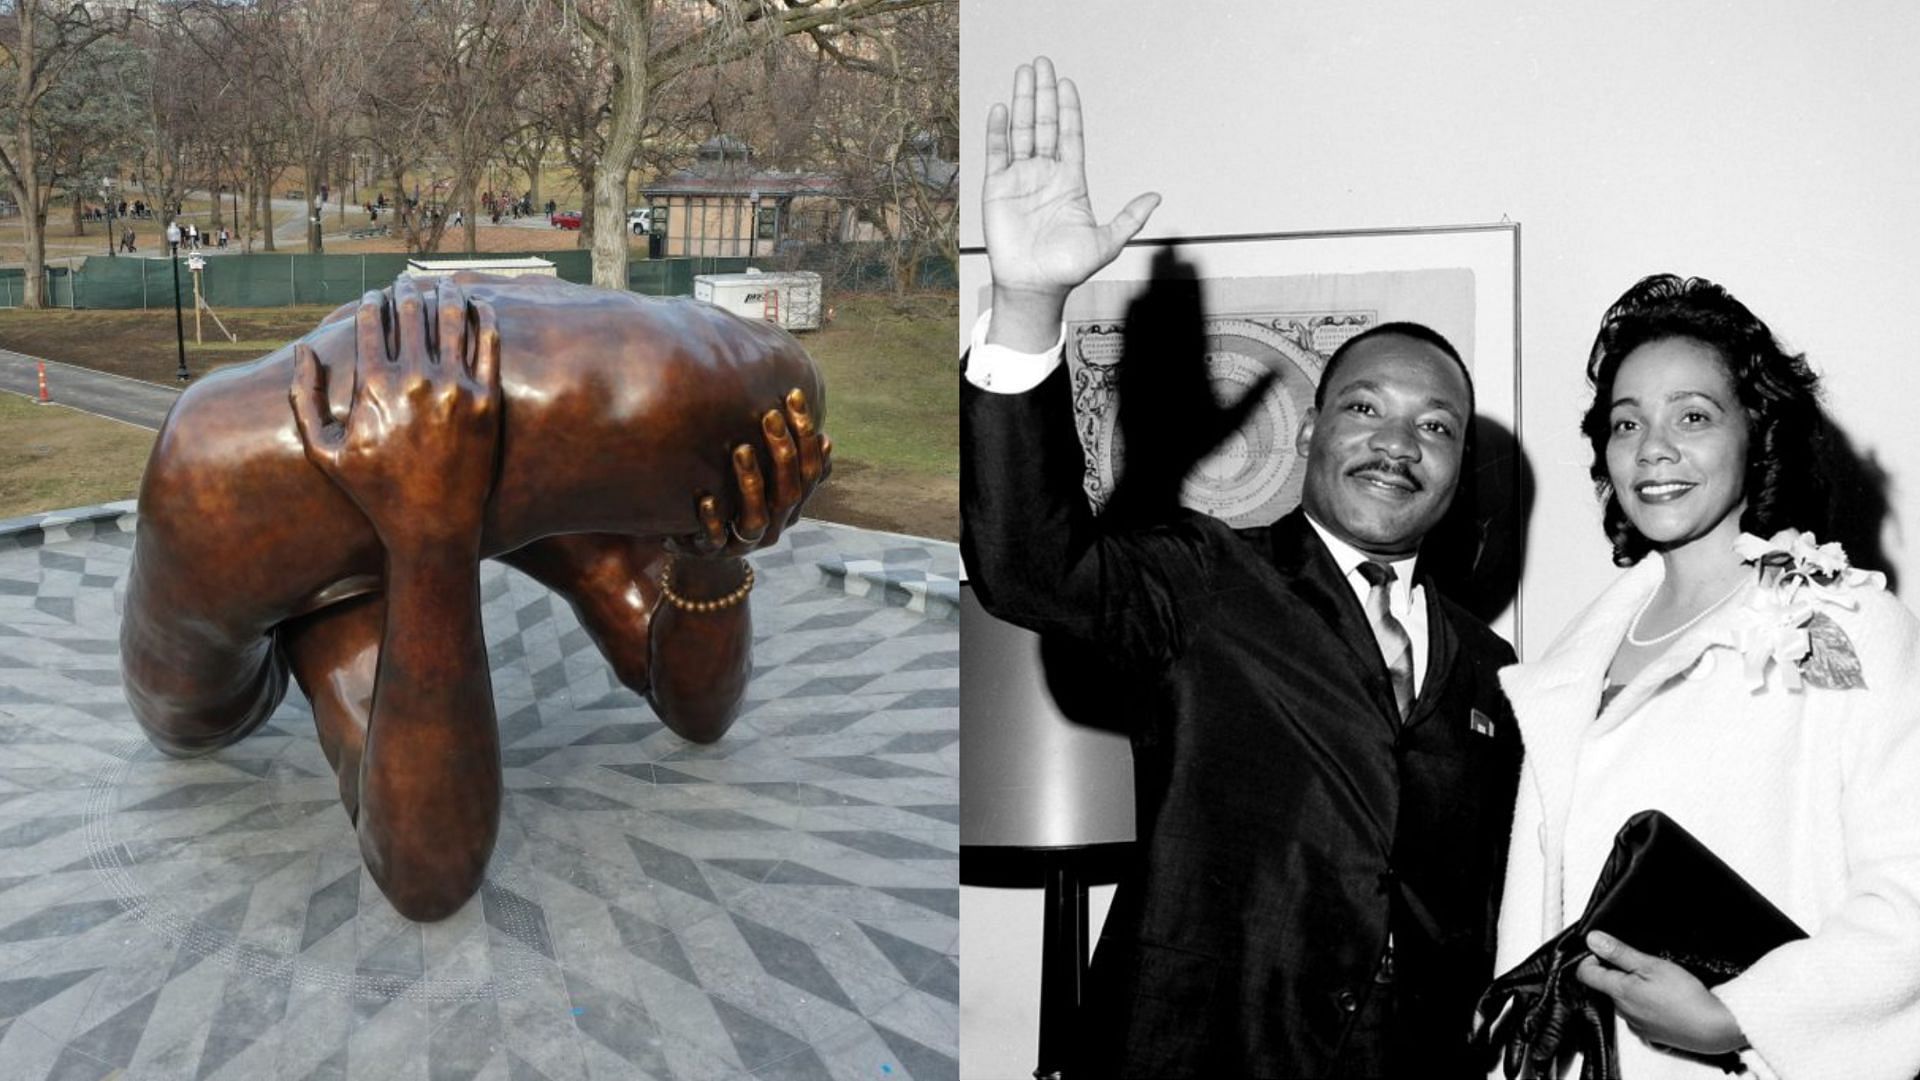 Sculpture honoring Martin Luther King Jr. and his wife Coretta Scott King